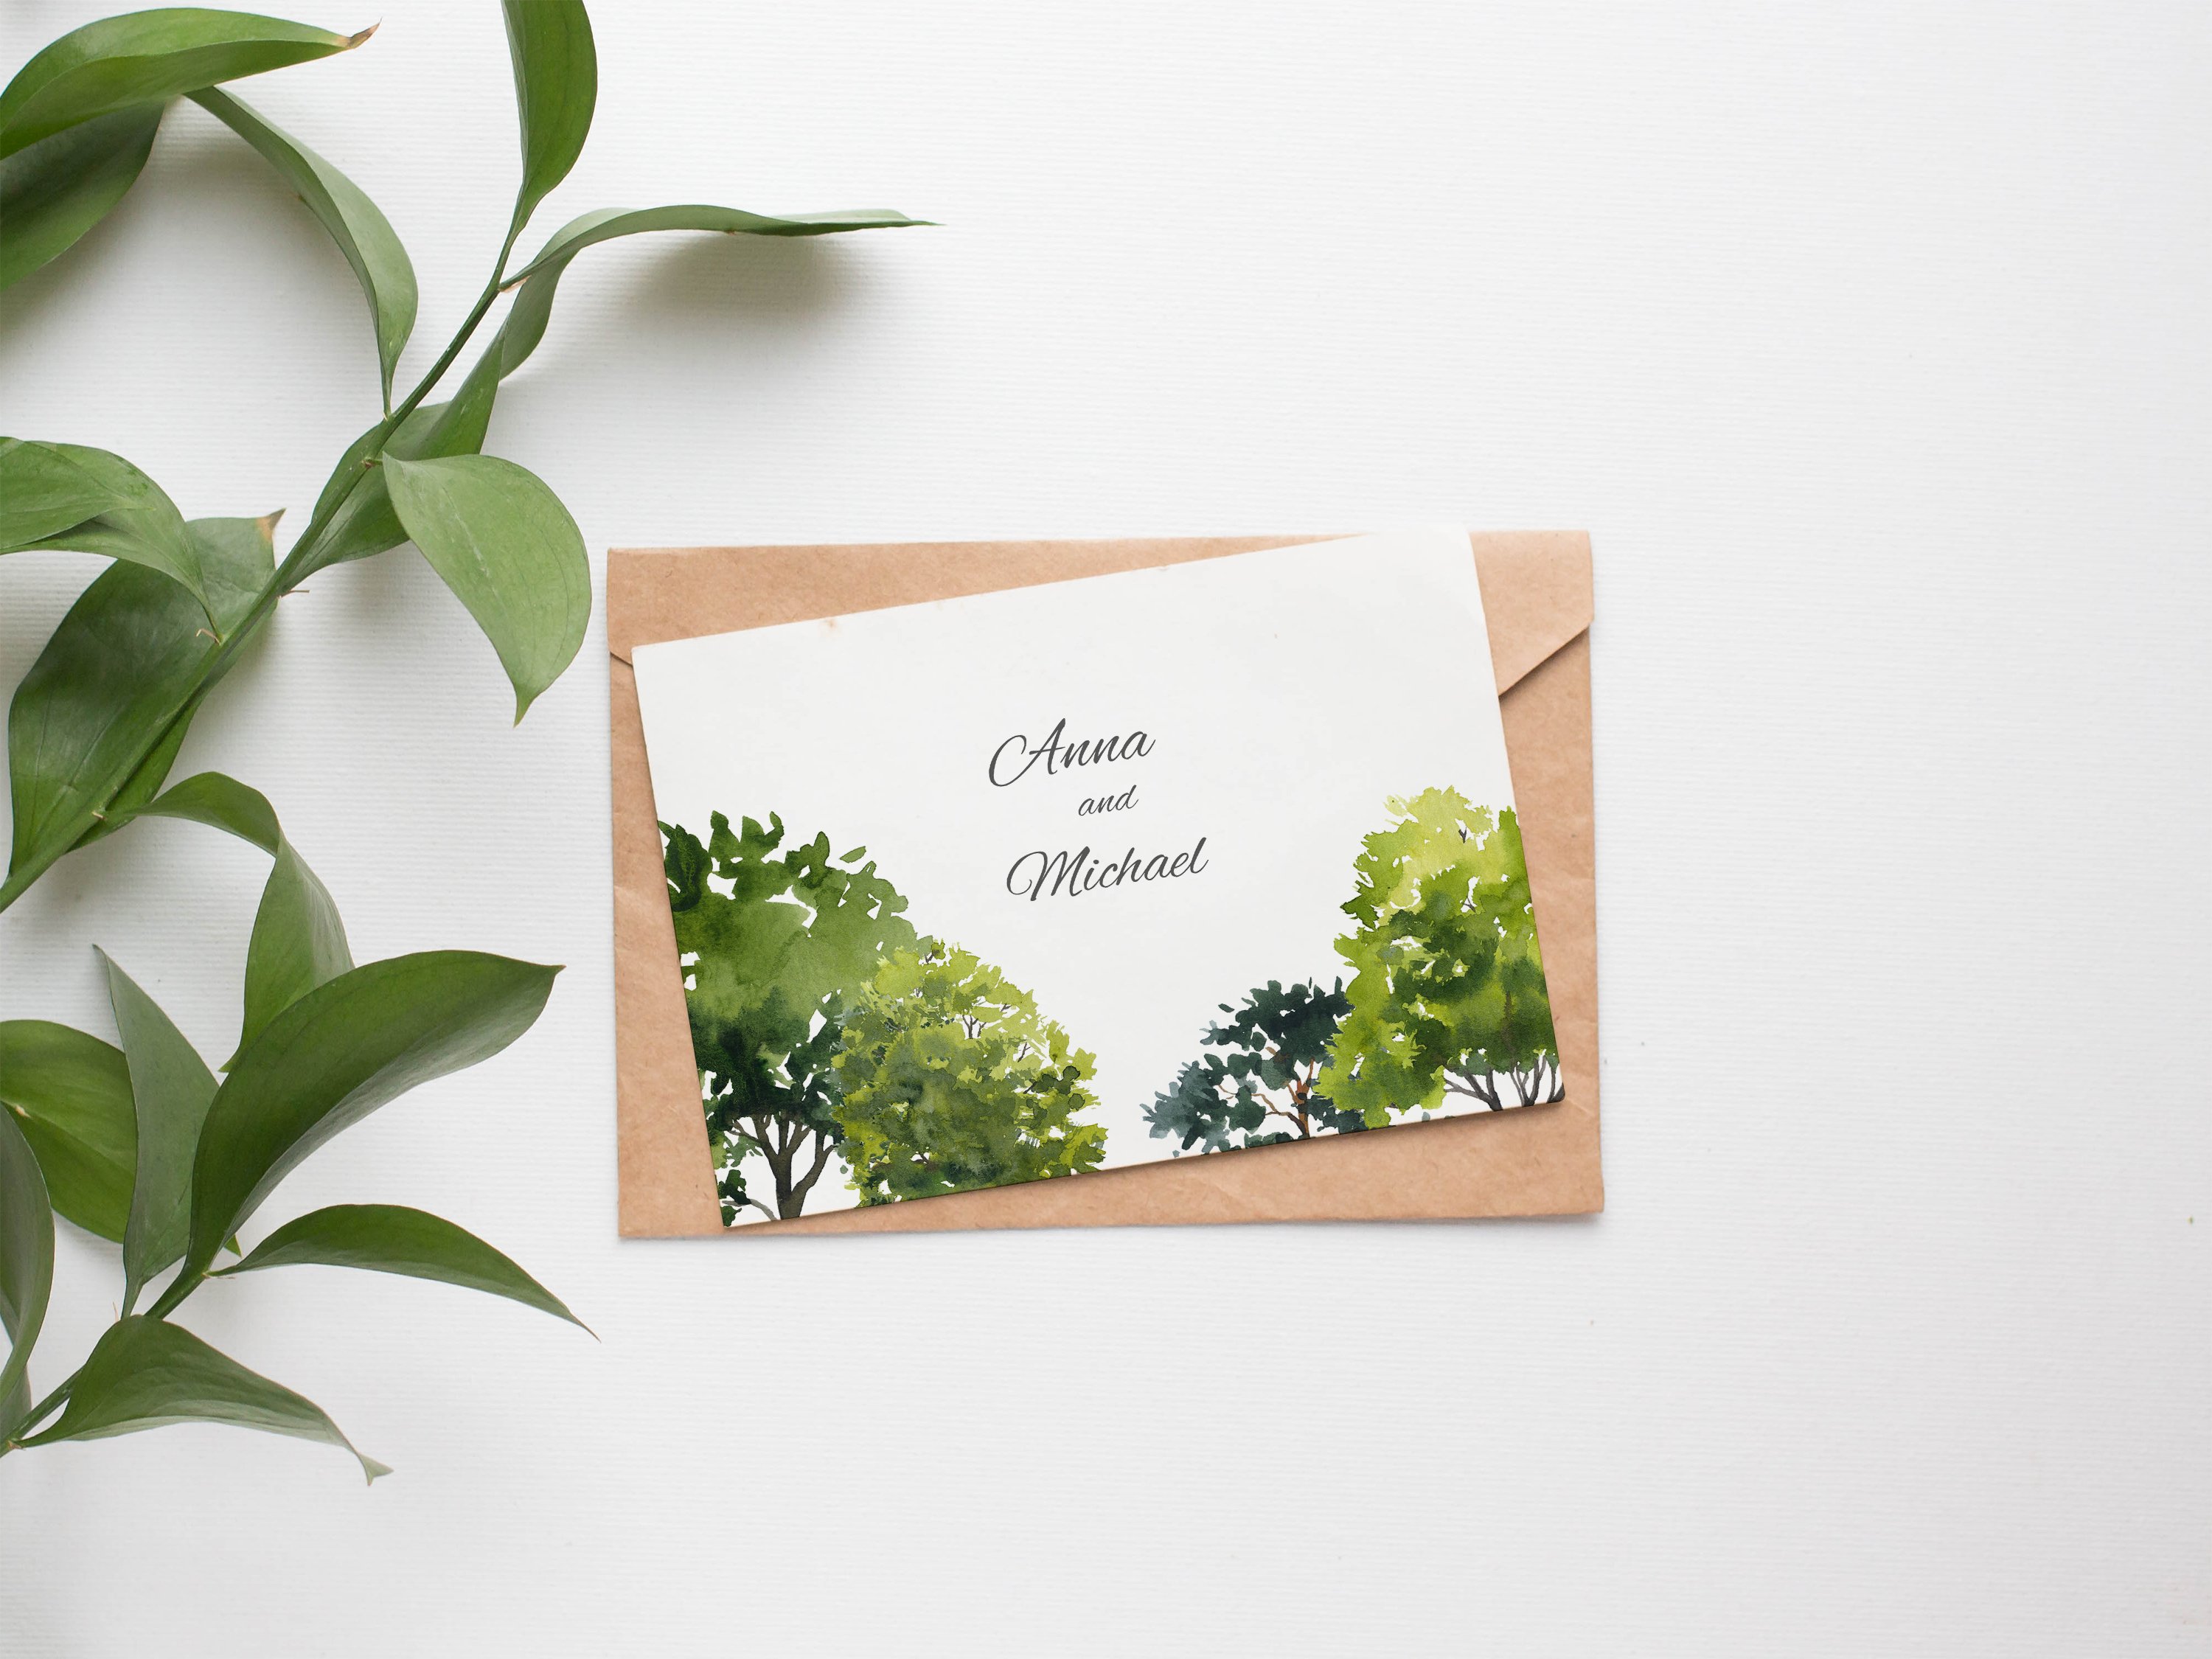 Card with a watercolor painting of trees on it.